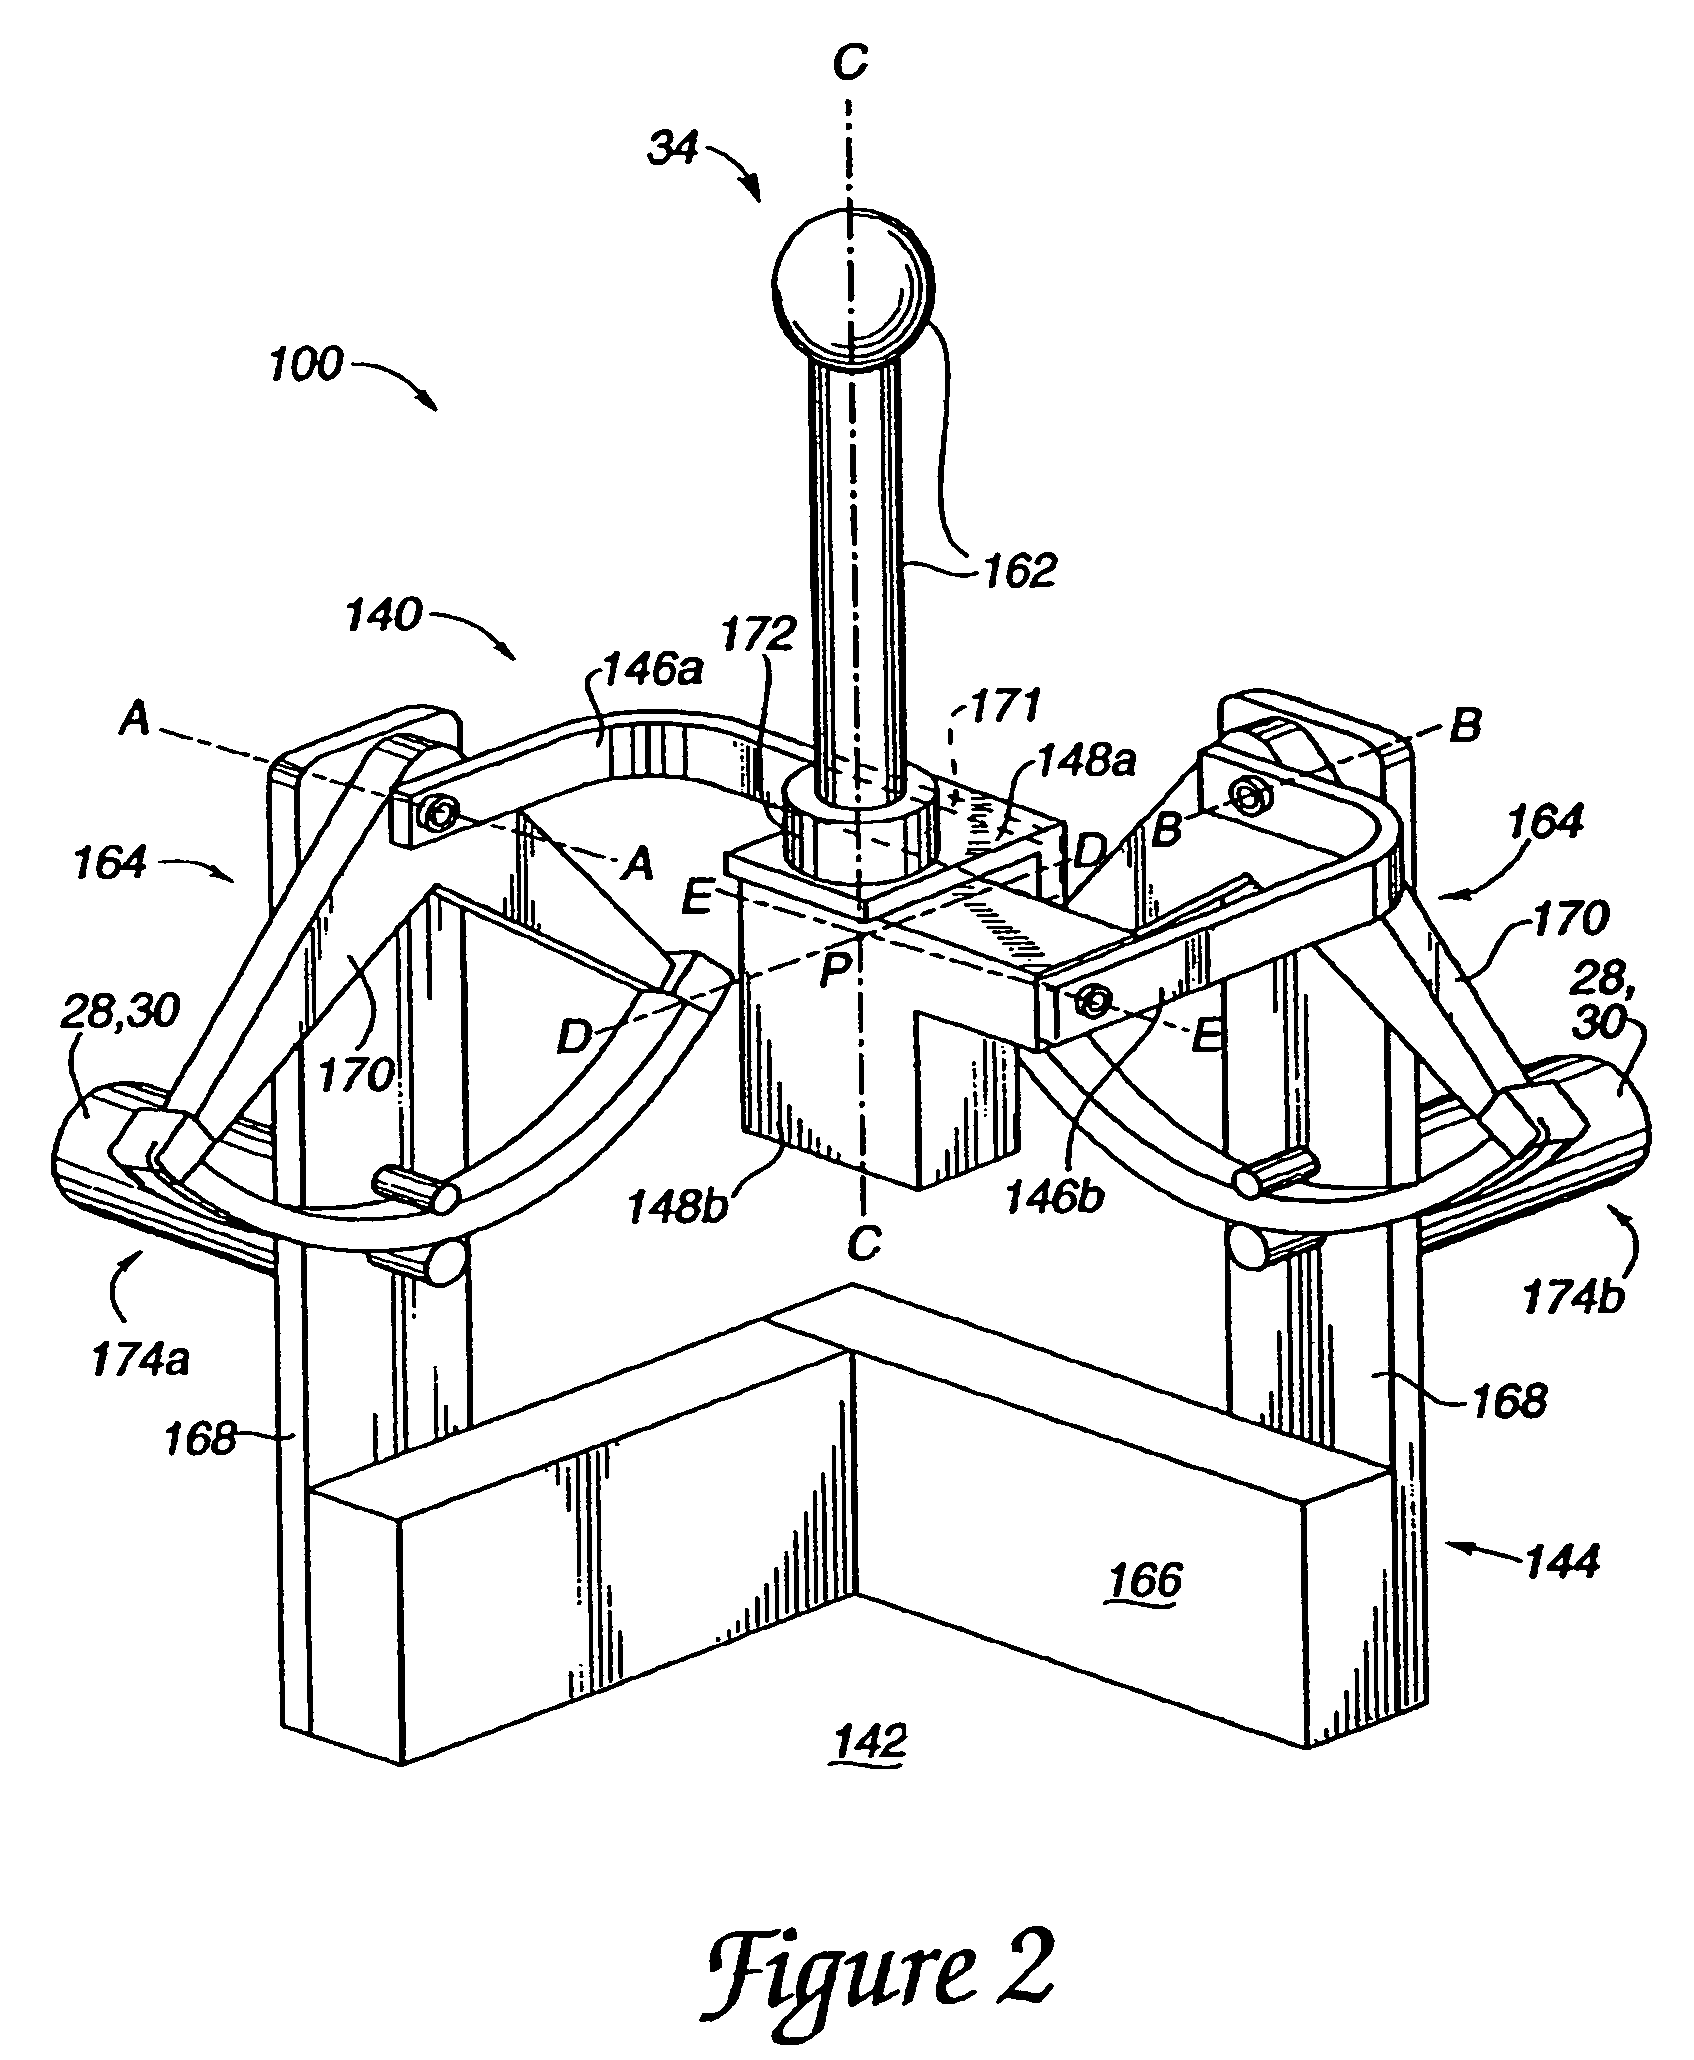 Method and apparatus for streaming force values to a force feedback device